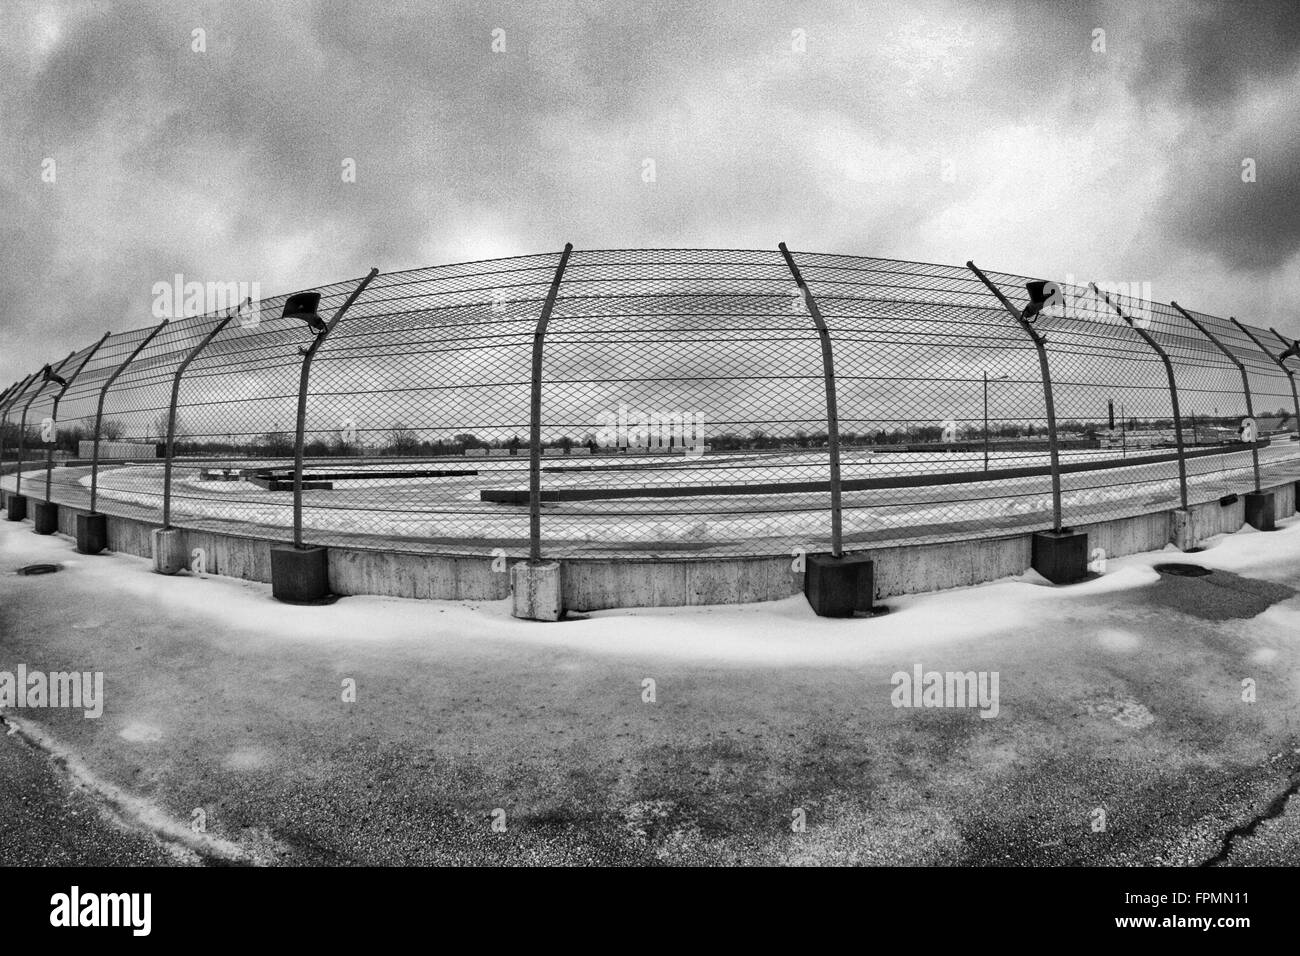 Racetrack at State Fair Grounds Milwaukee Wisconsin in winter.  Grain Stock Photo